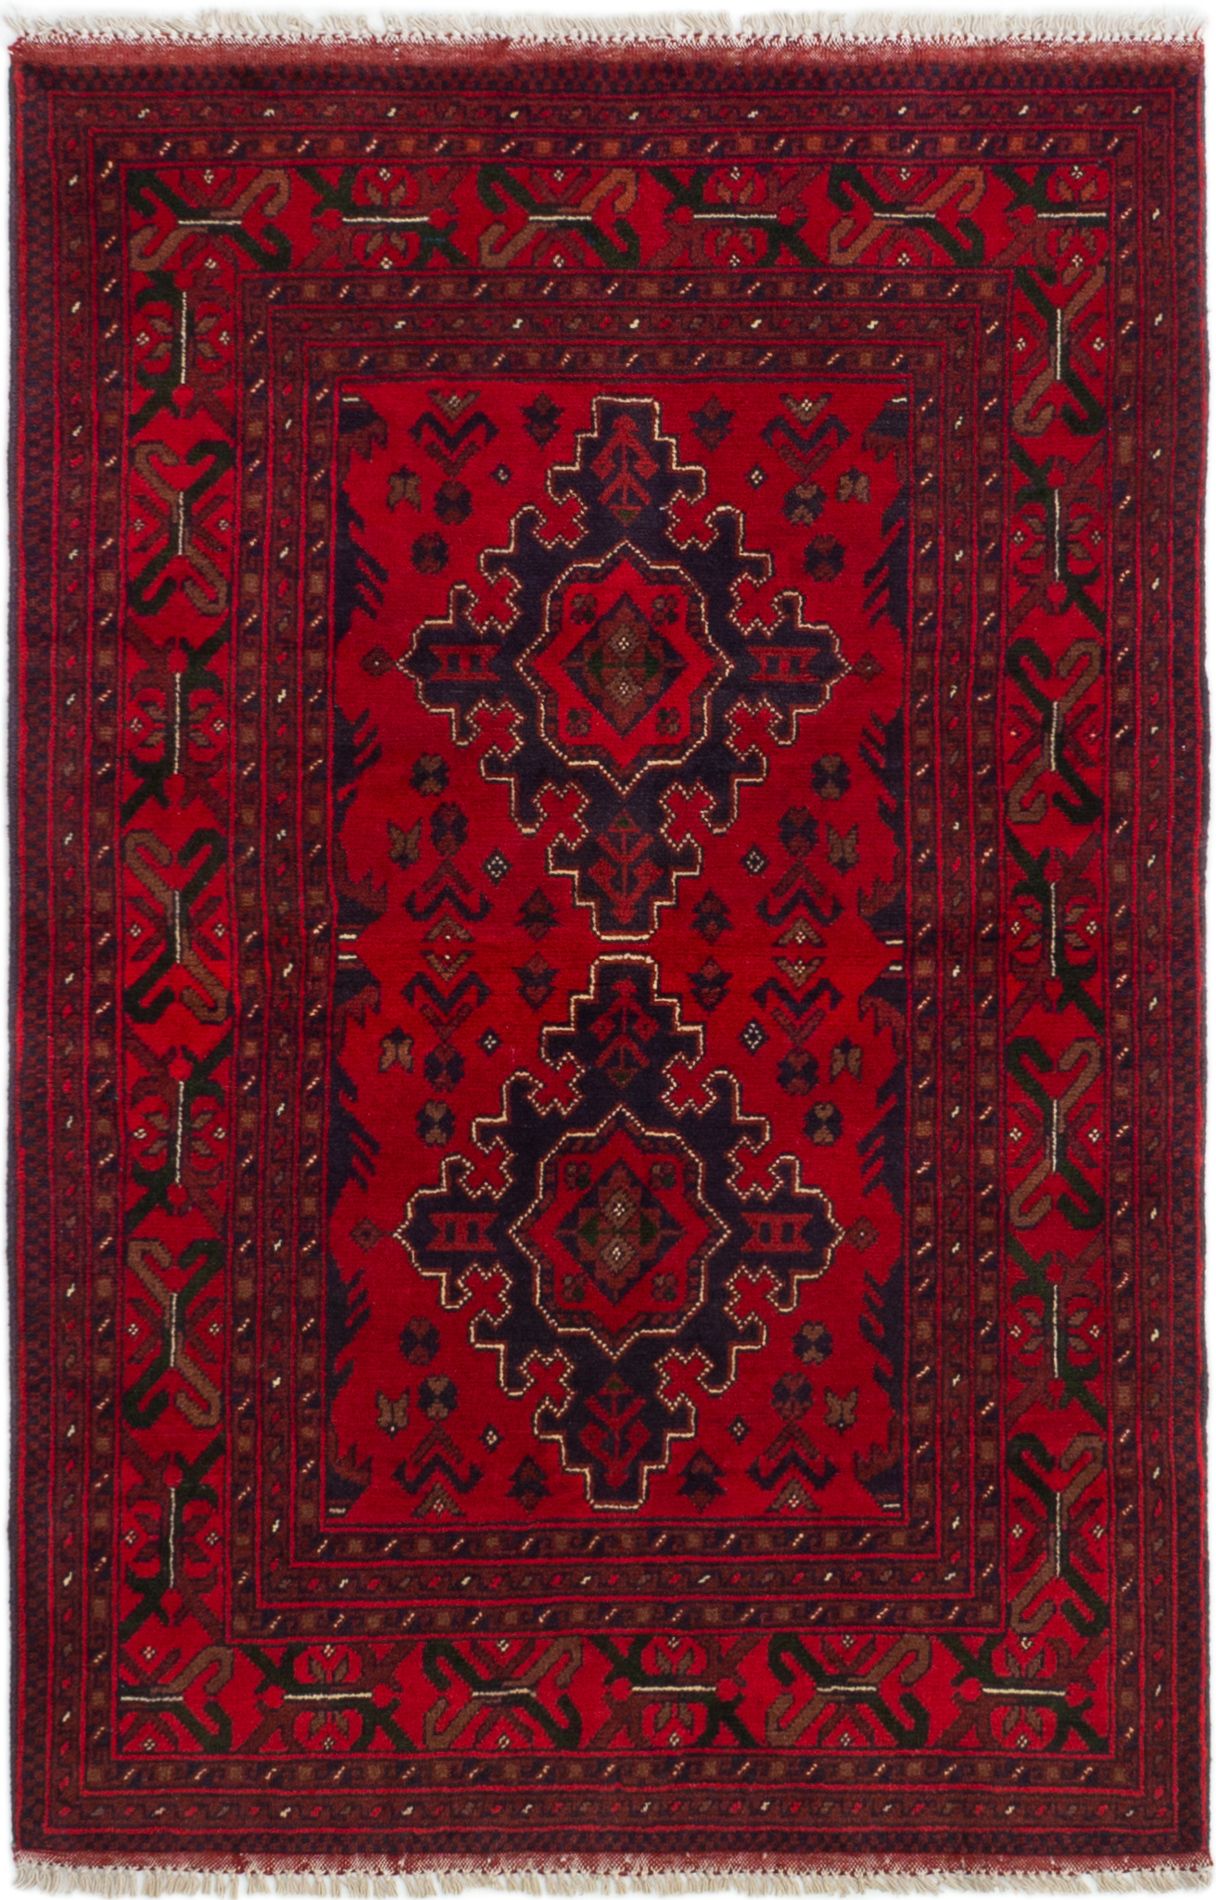 Hand-knotted Finest Khal Mohammadi Red Wool Rug 3'1" x 4'10"  Size: 3'1" x 4'10"  